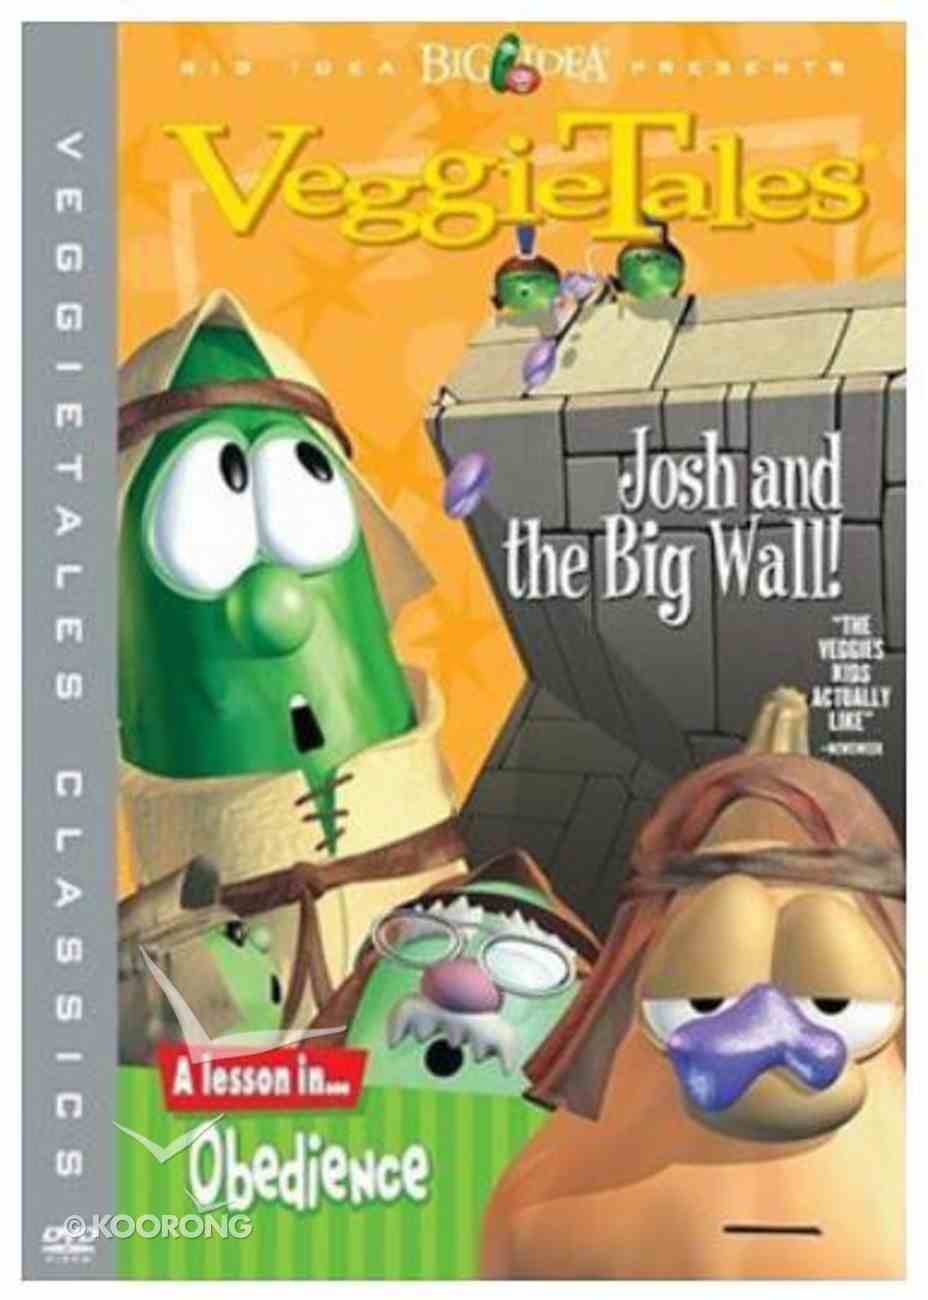 Veggie Tales #09: Josh and the Big Wall (2011 Re-Issue) (#09 in Veggie Tales Visual Series (Veggietales)) DVD